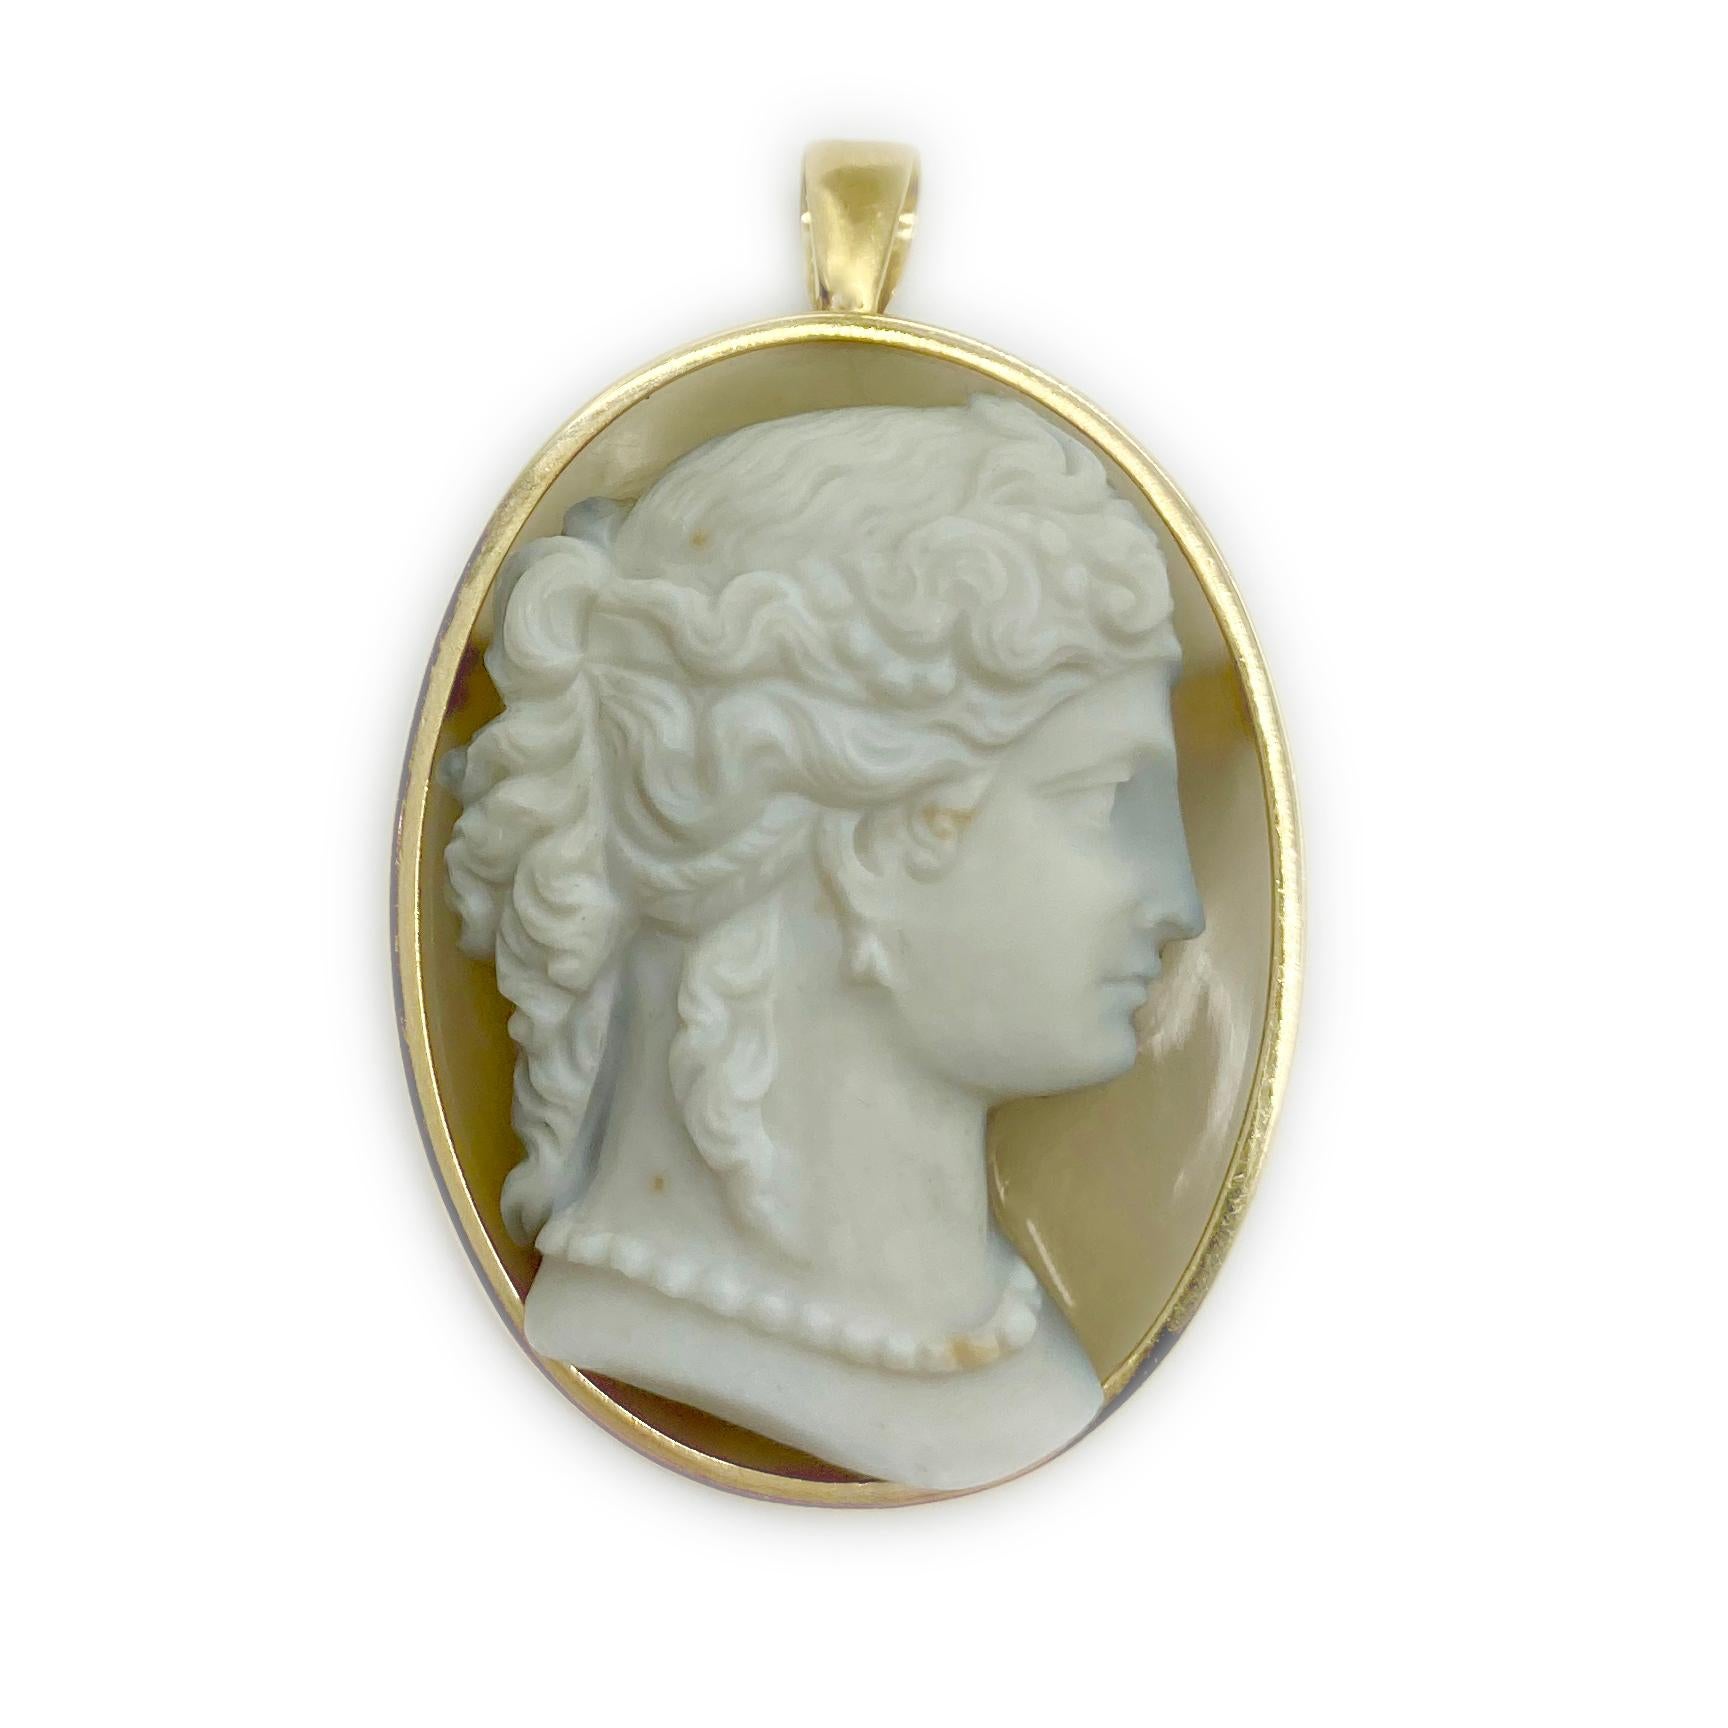 An antique cameo carved from agate, mounted as a pendant-brooch. 19th Century.